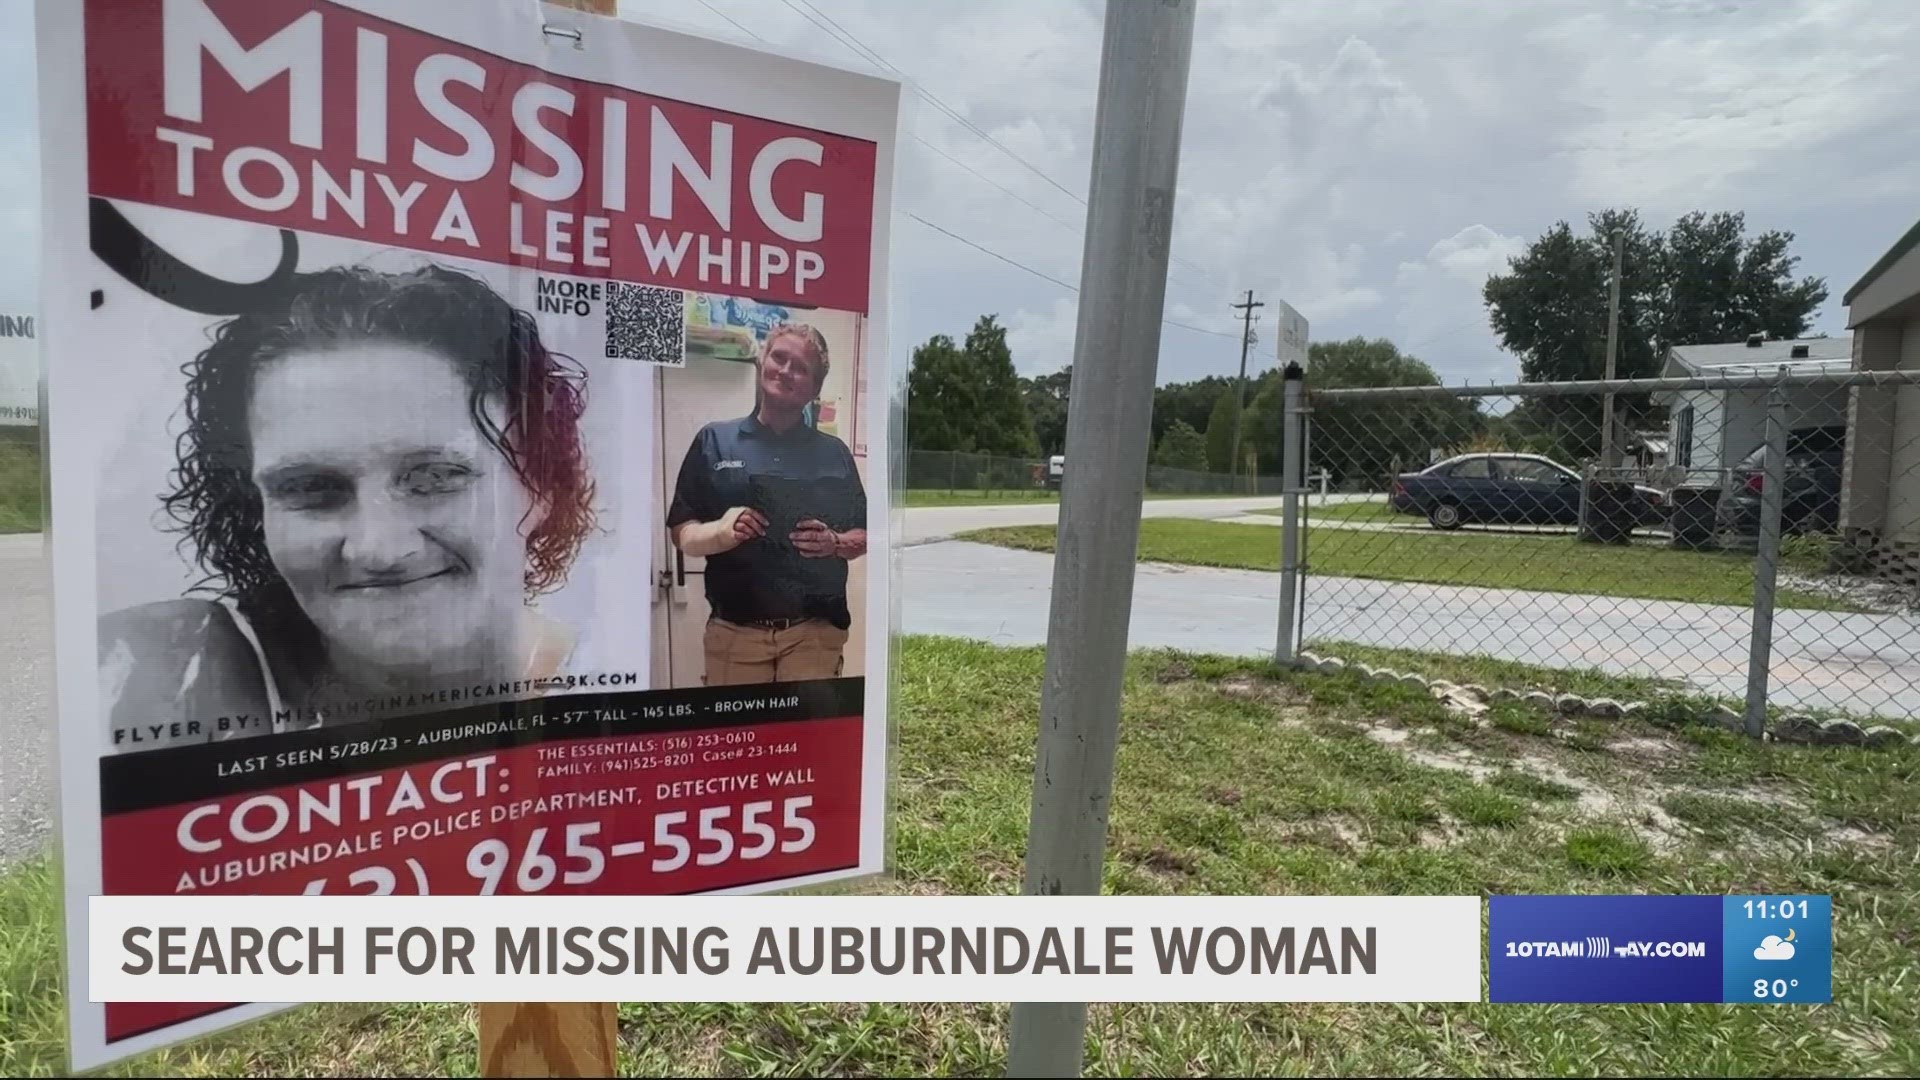 Tonya Whipp vanished in late May, and police confirmed they searched a man's home in Auburndale but didn't find her.